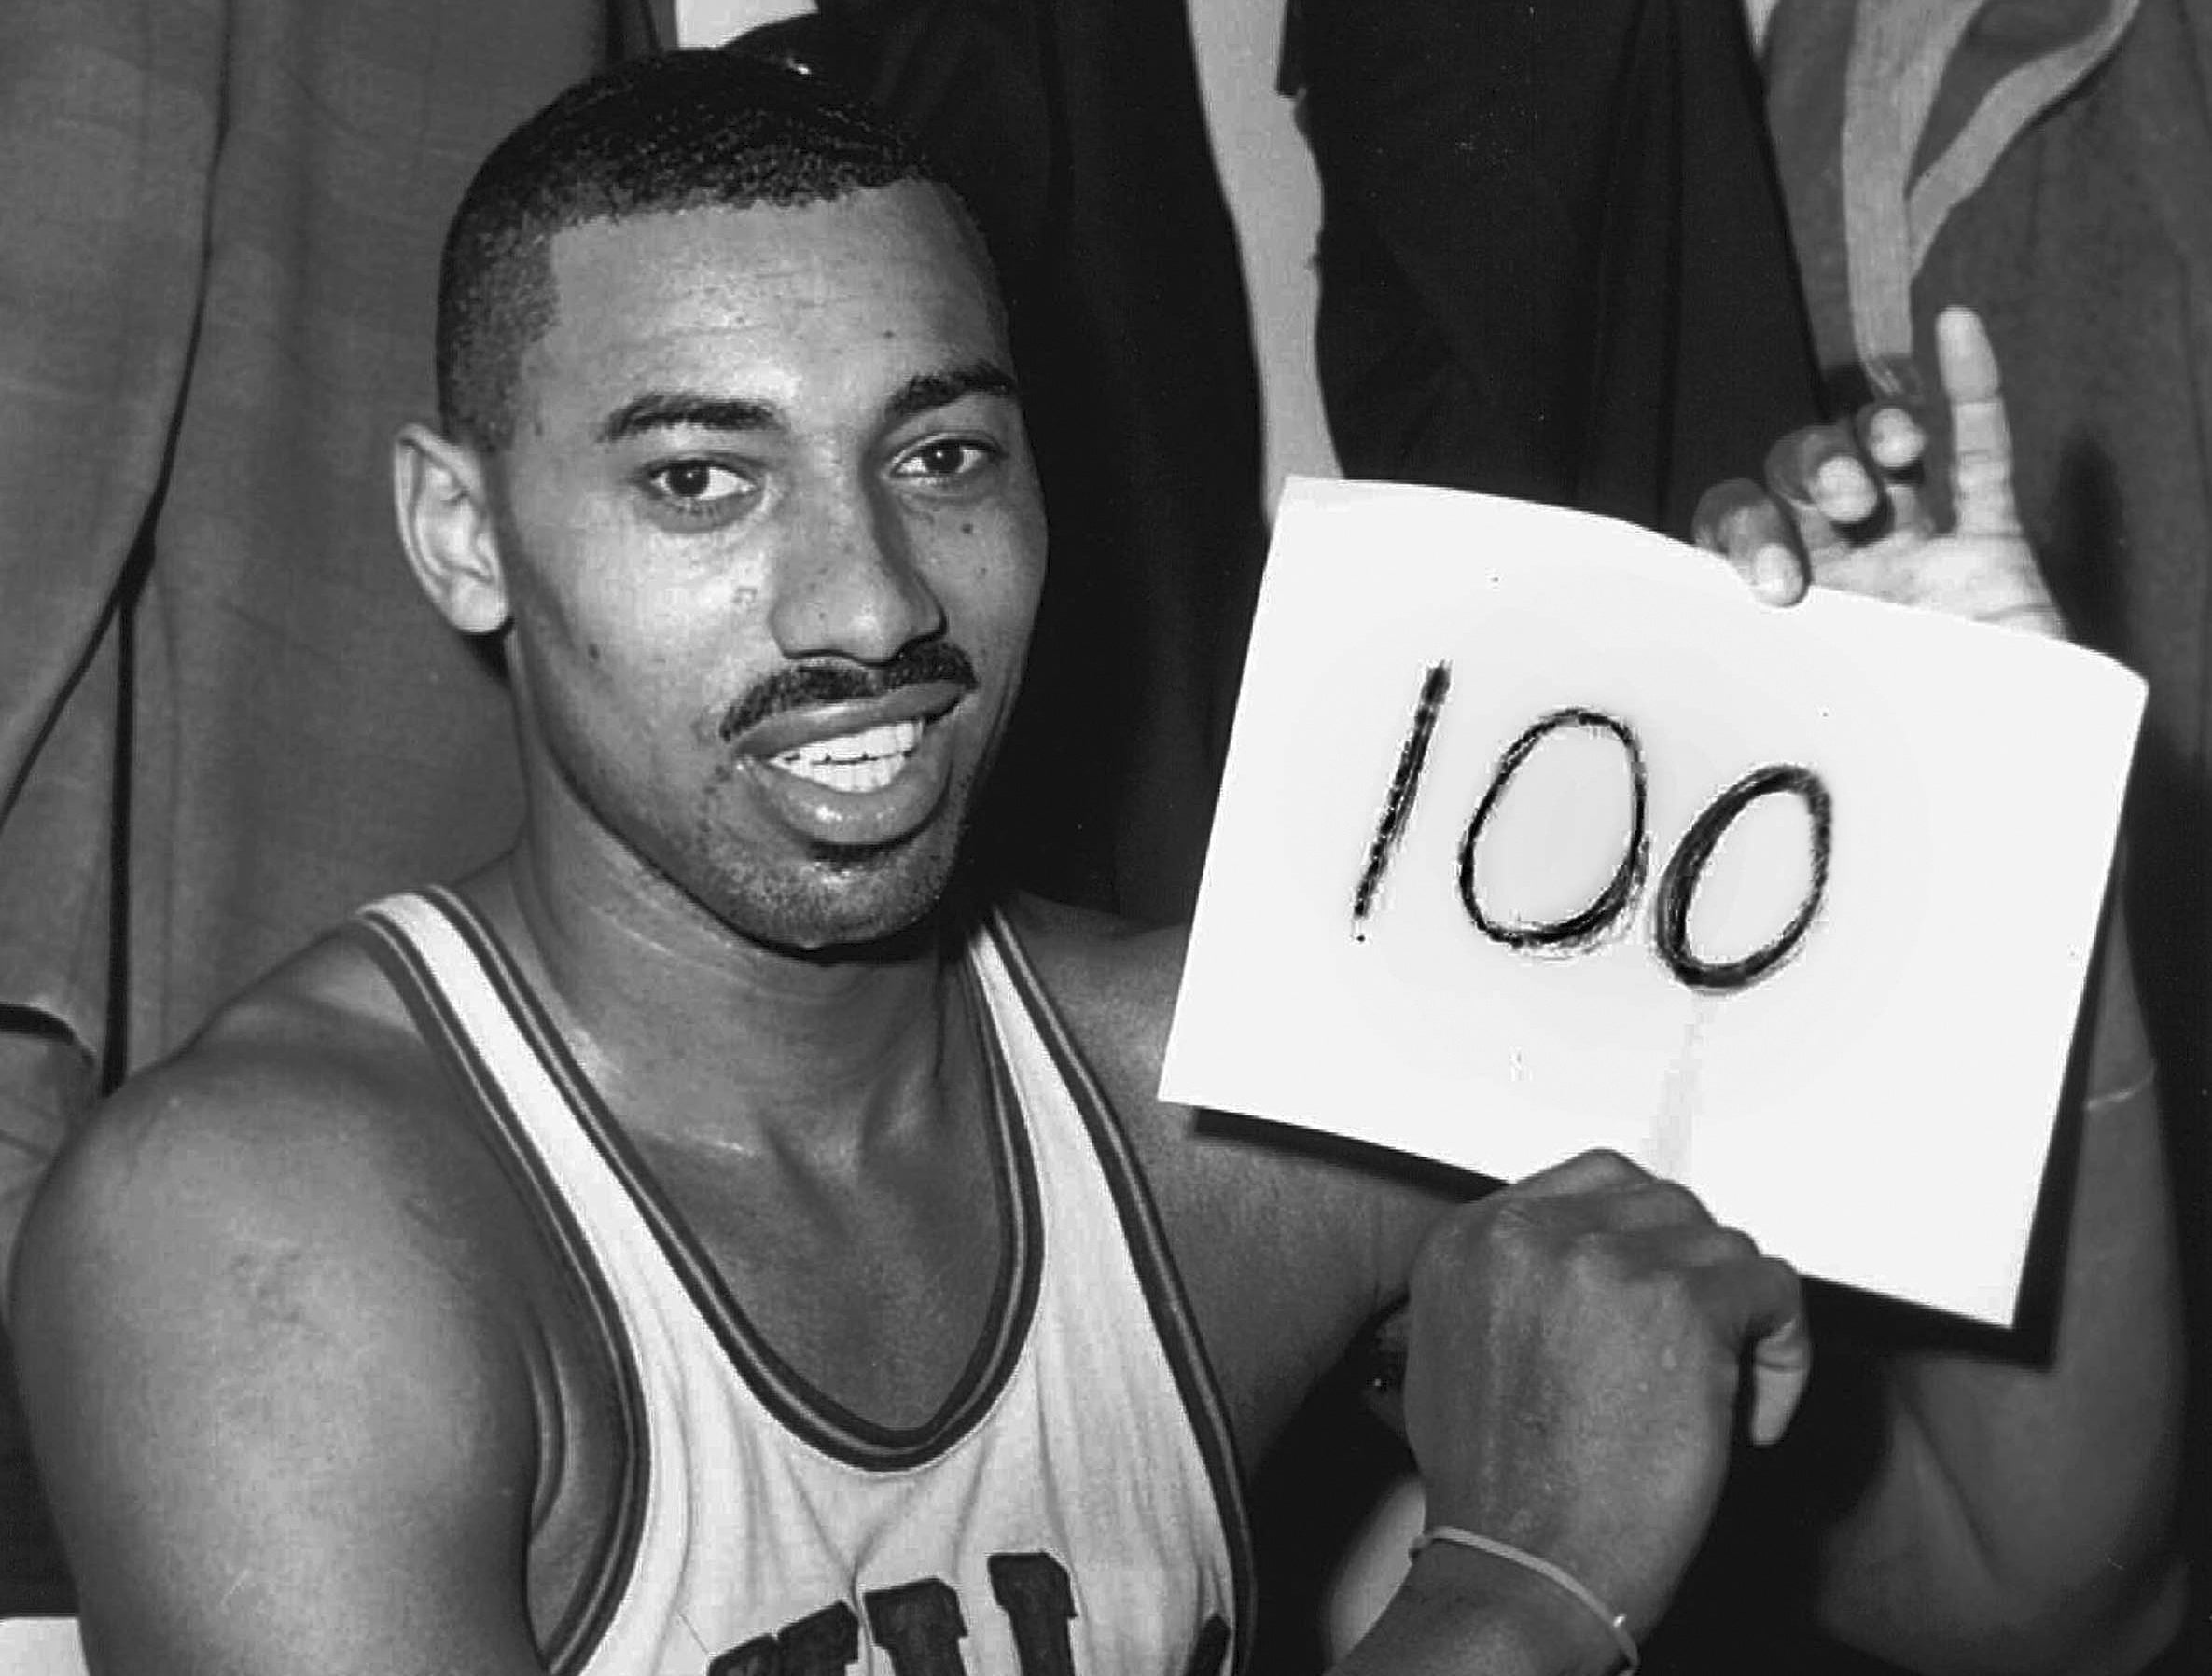 Who scored 100 points in a single game as a 76er